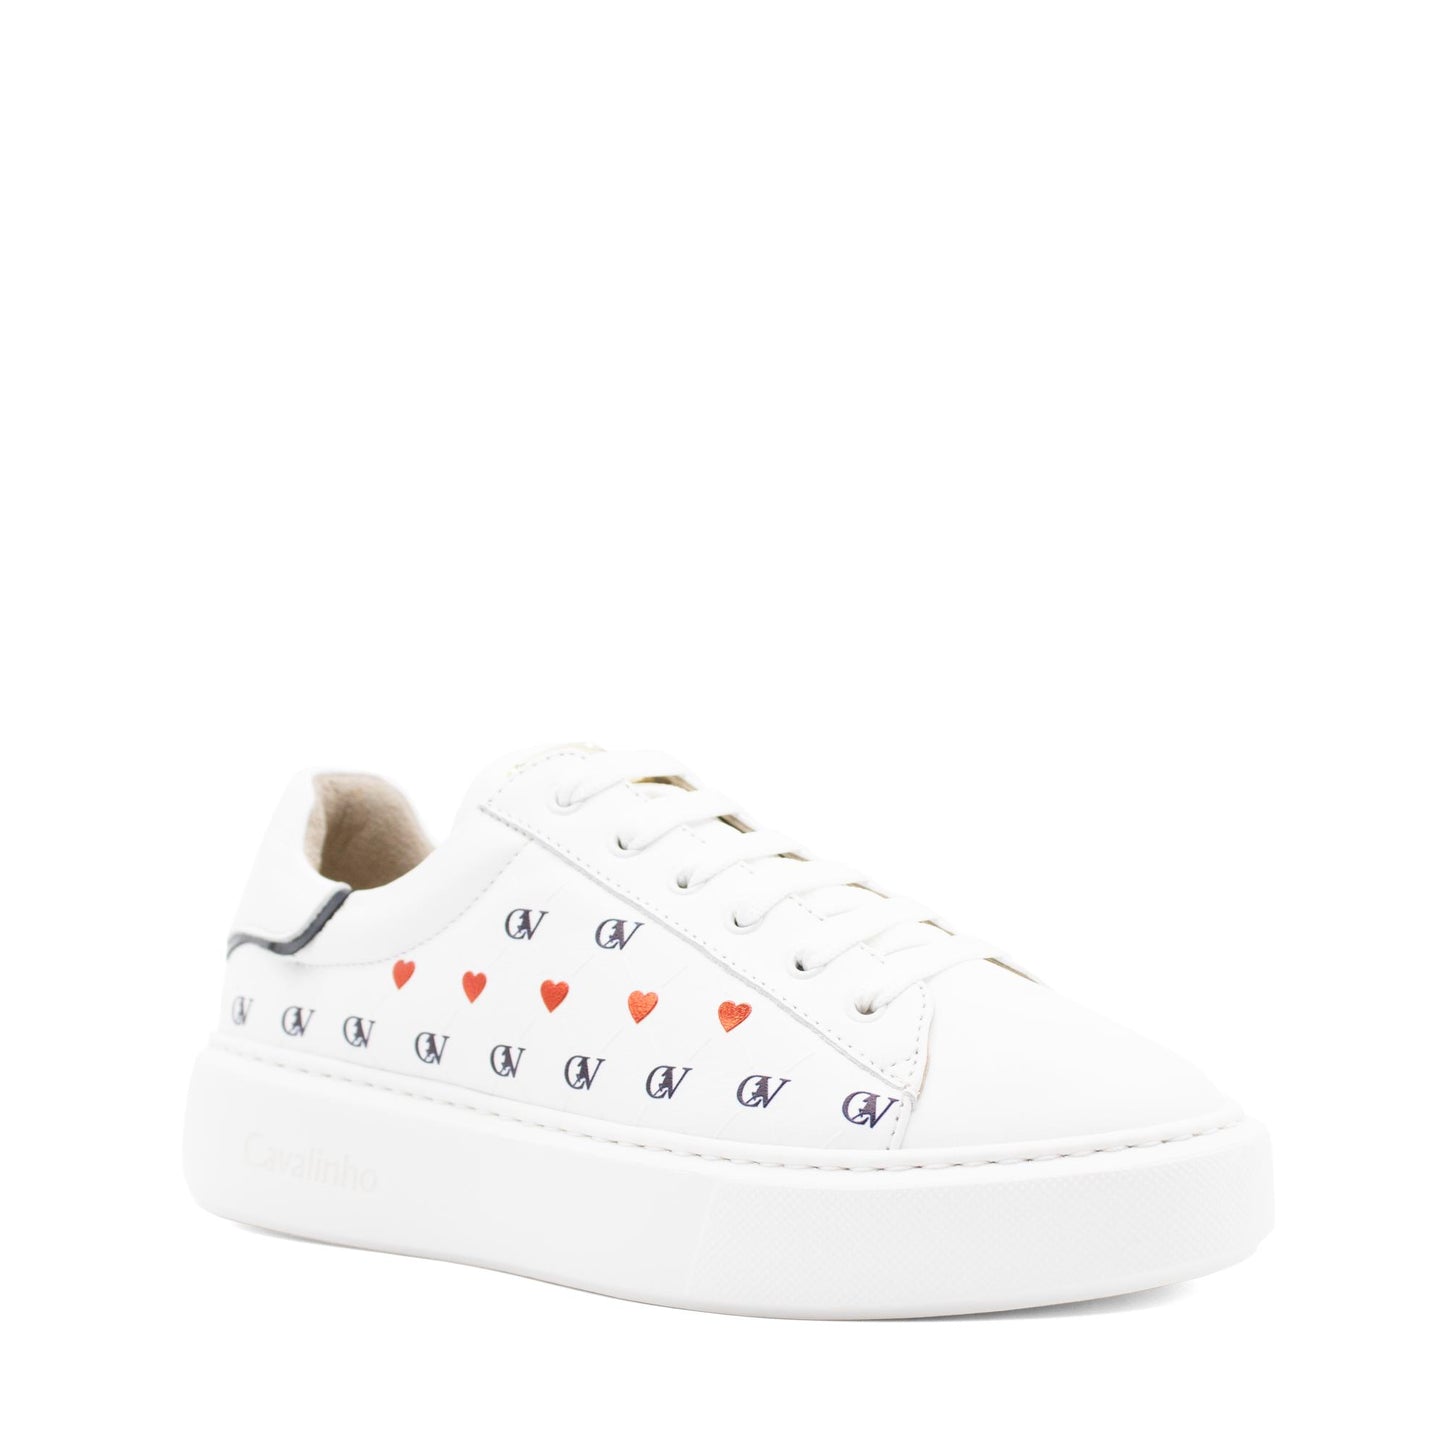 Cavalinho Love Yourself Sneakers - Navy / White / Red - 48010108.22_2